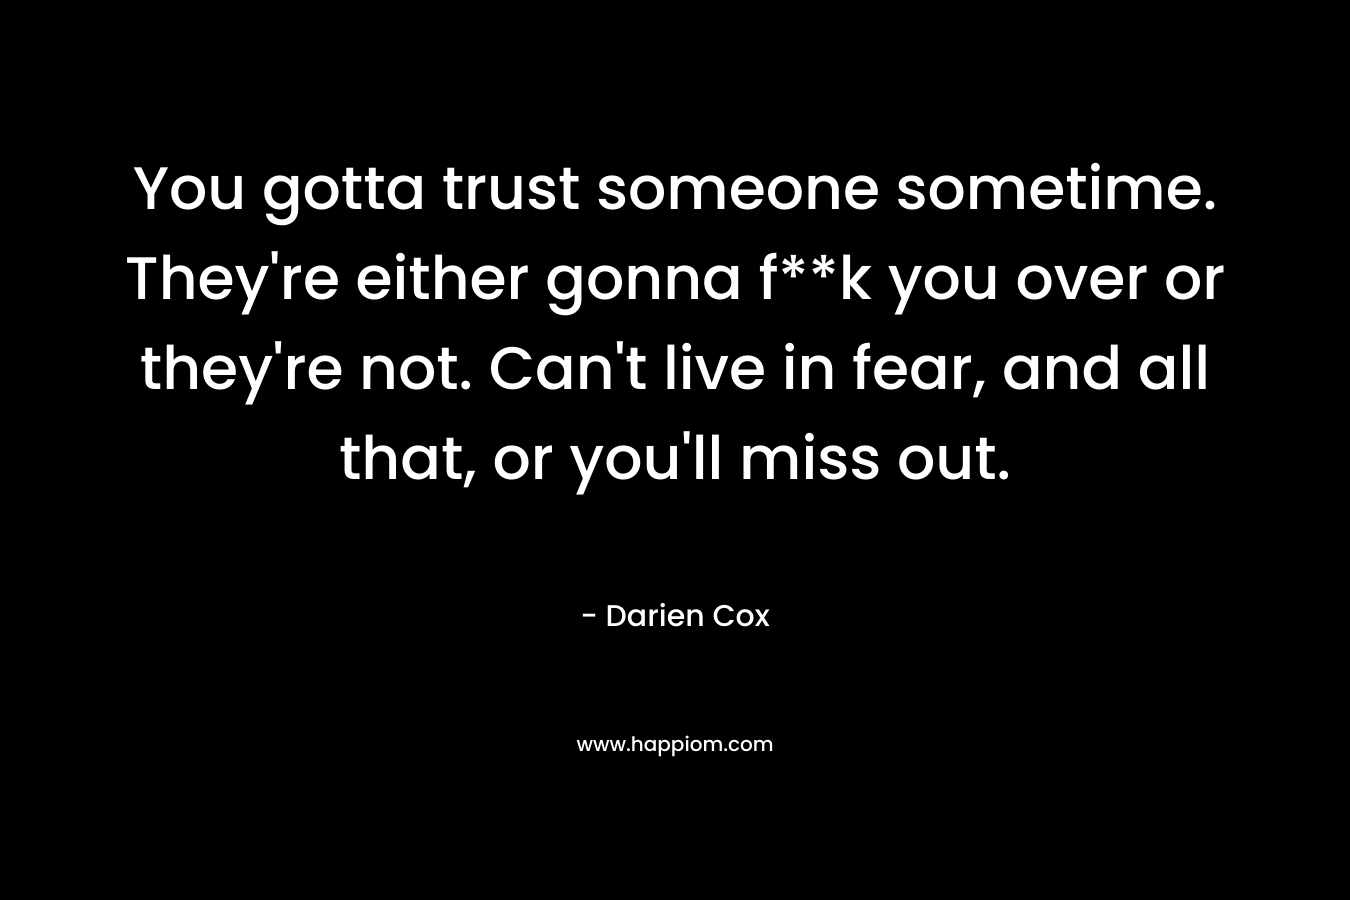 You gotta trust someone sometime. They're either gonna f**k you over or they're not. Can't live in fear, and all that, or you'll miss out.